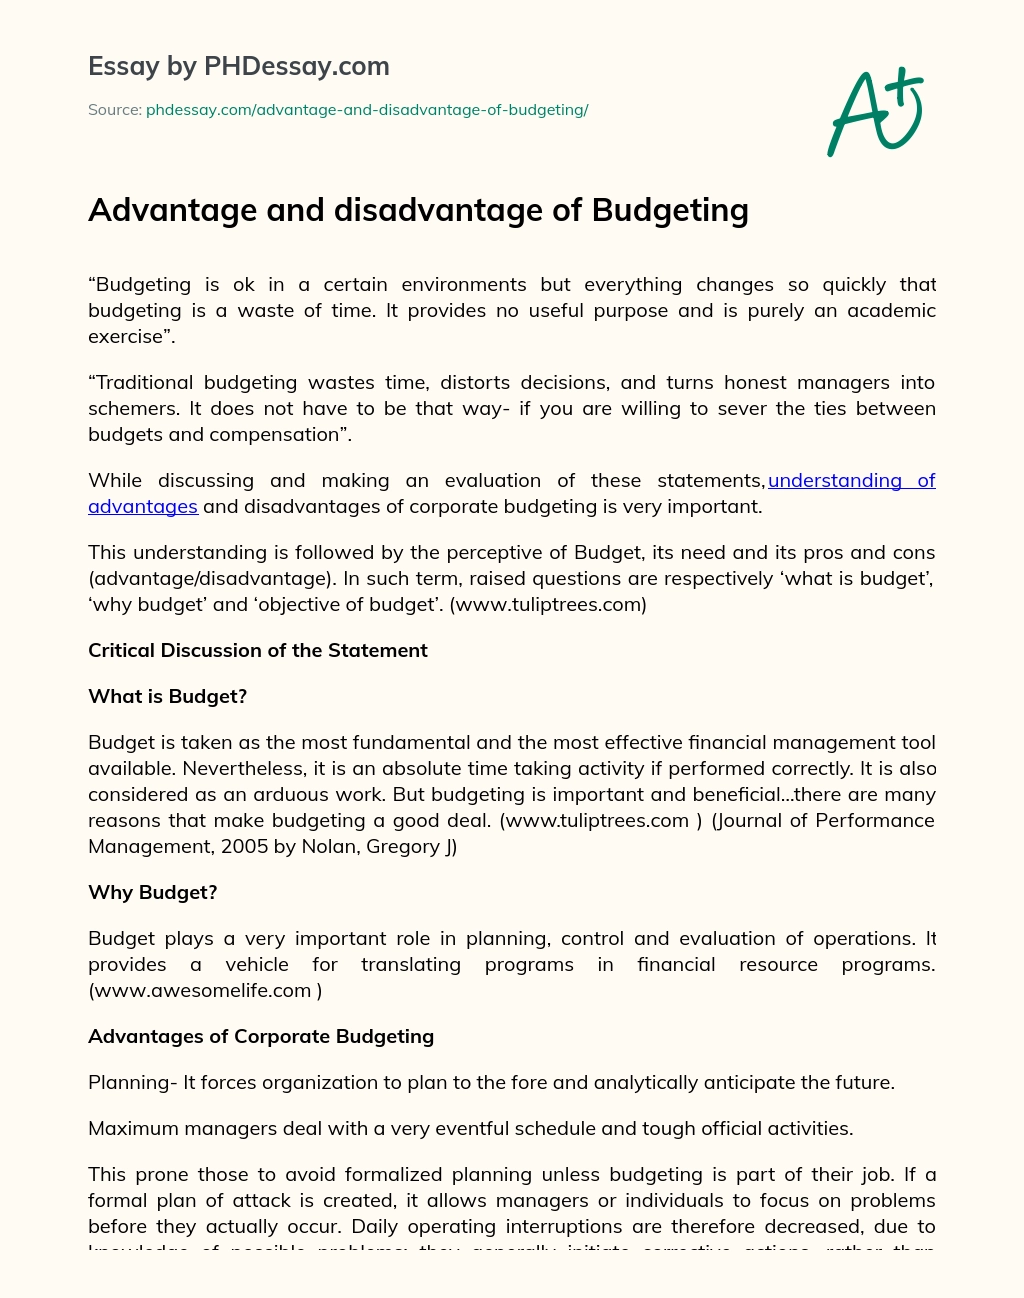 advantages of traditional budgeting